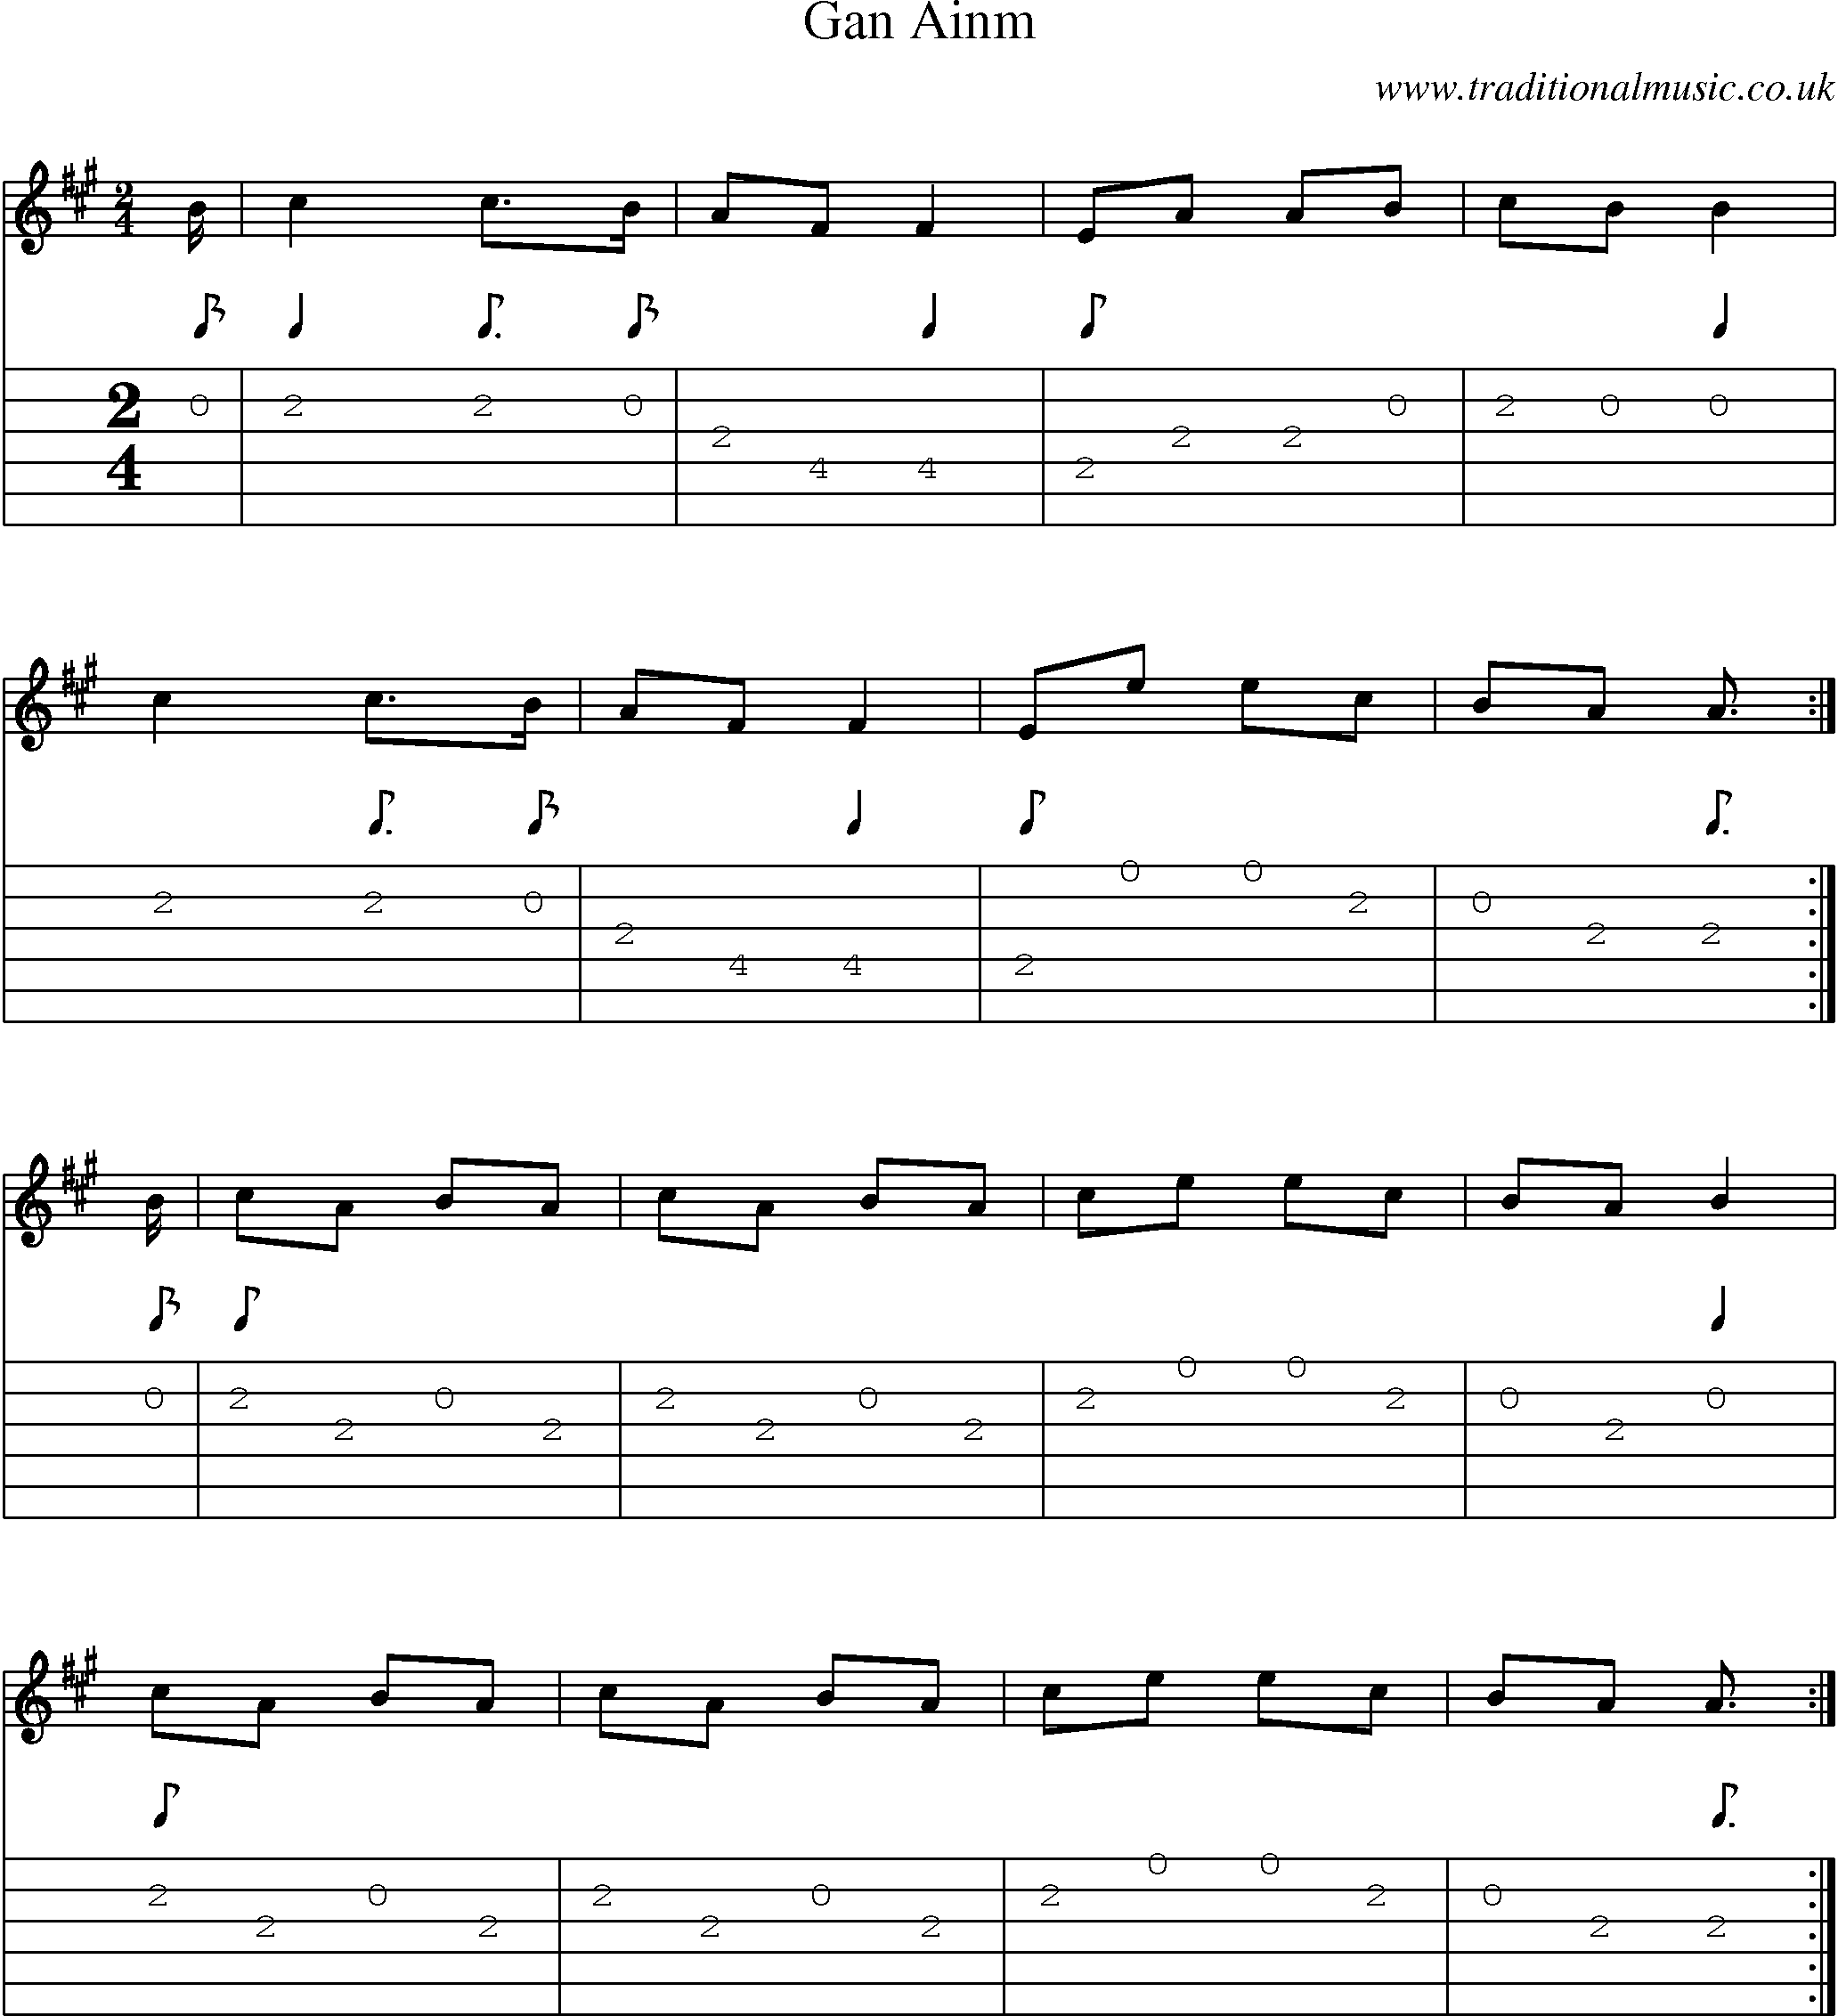 Music Score and Guitar Tabs for Gan Ainm